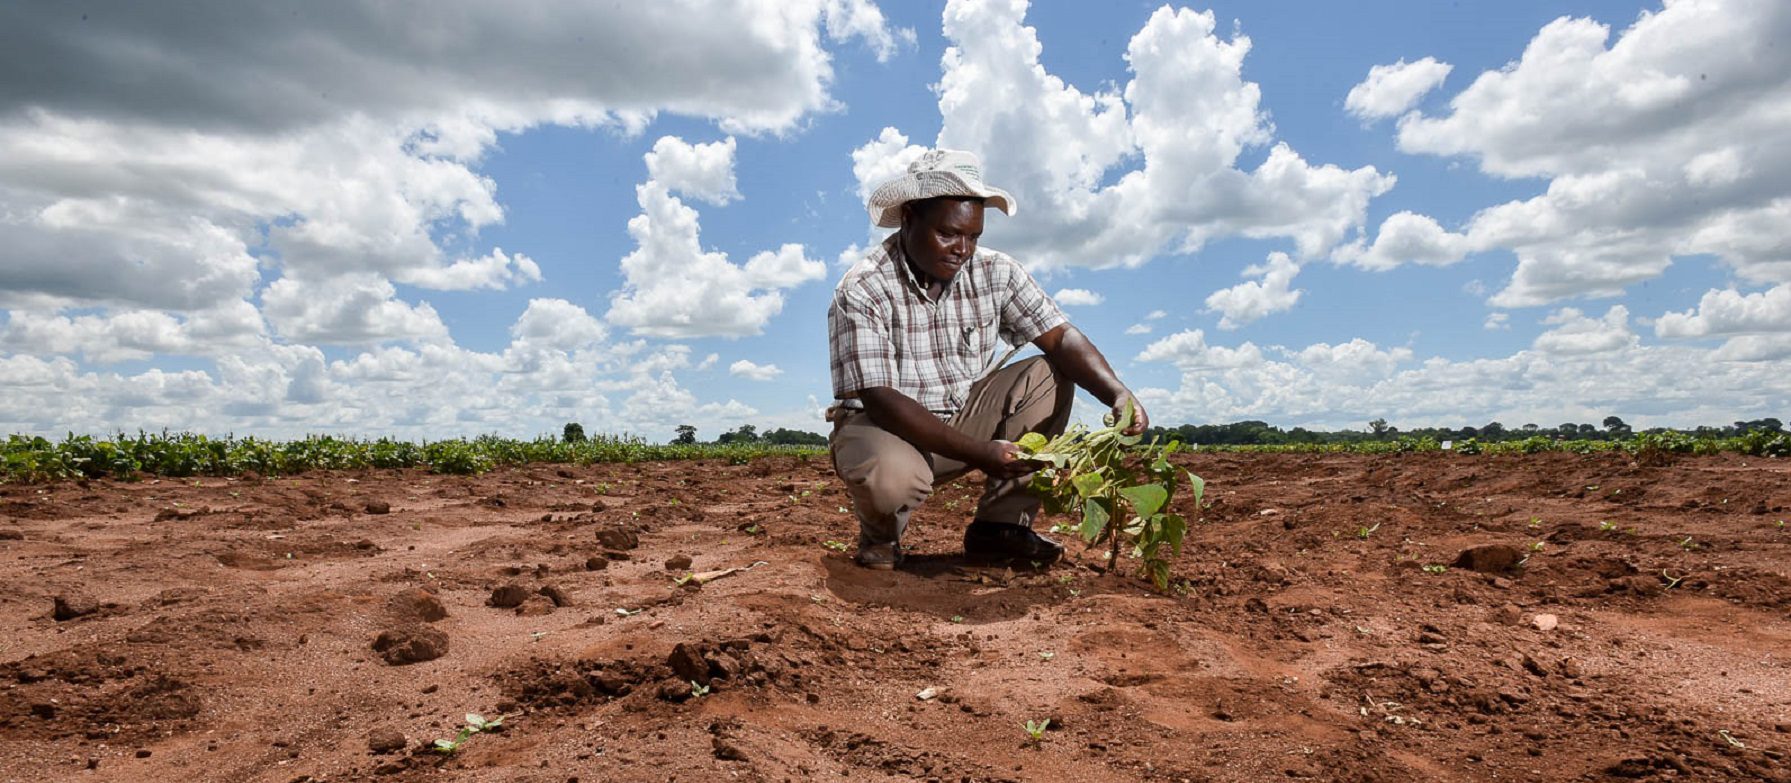 Adaptation of the African agriculture to climate change